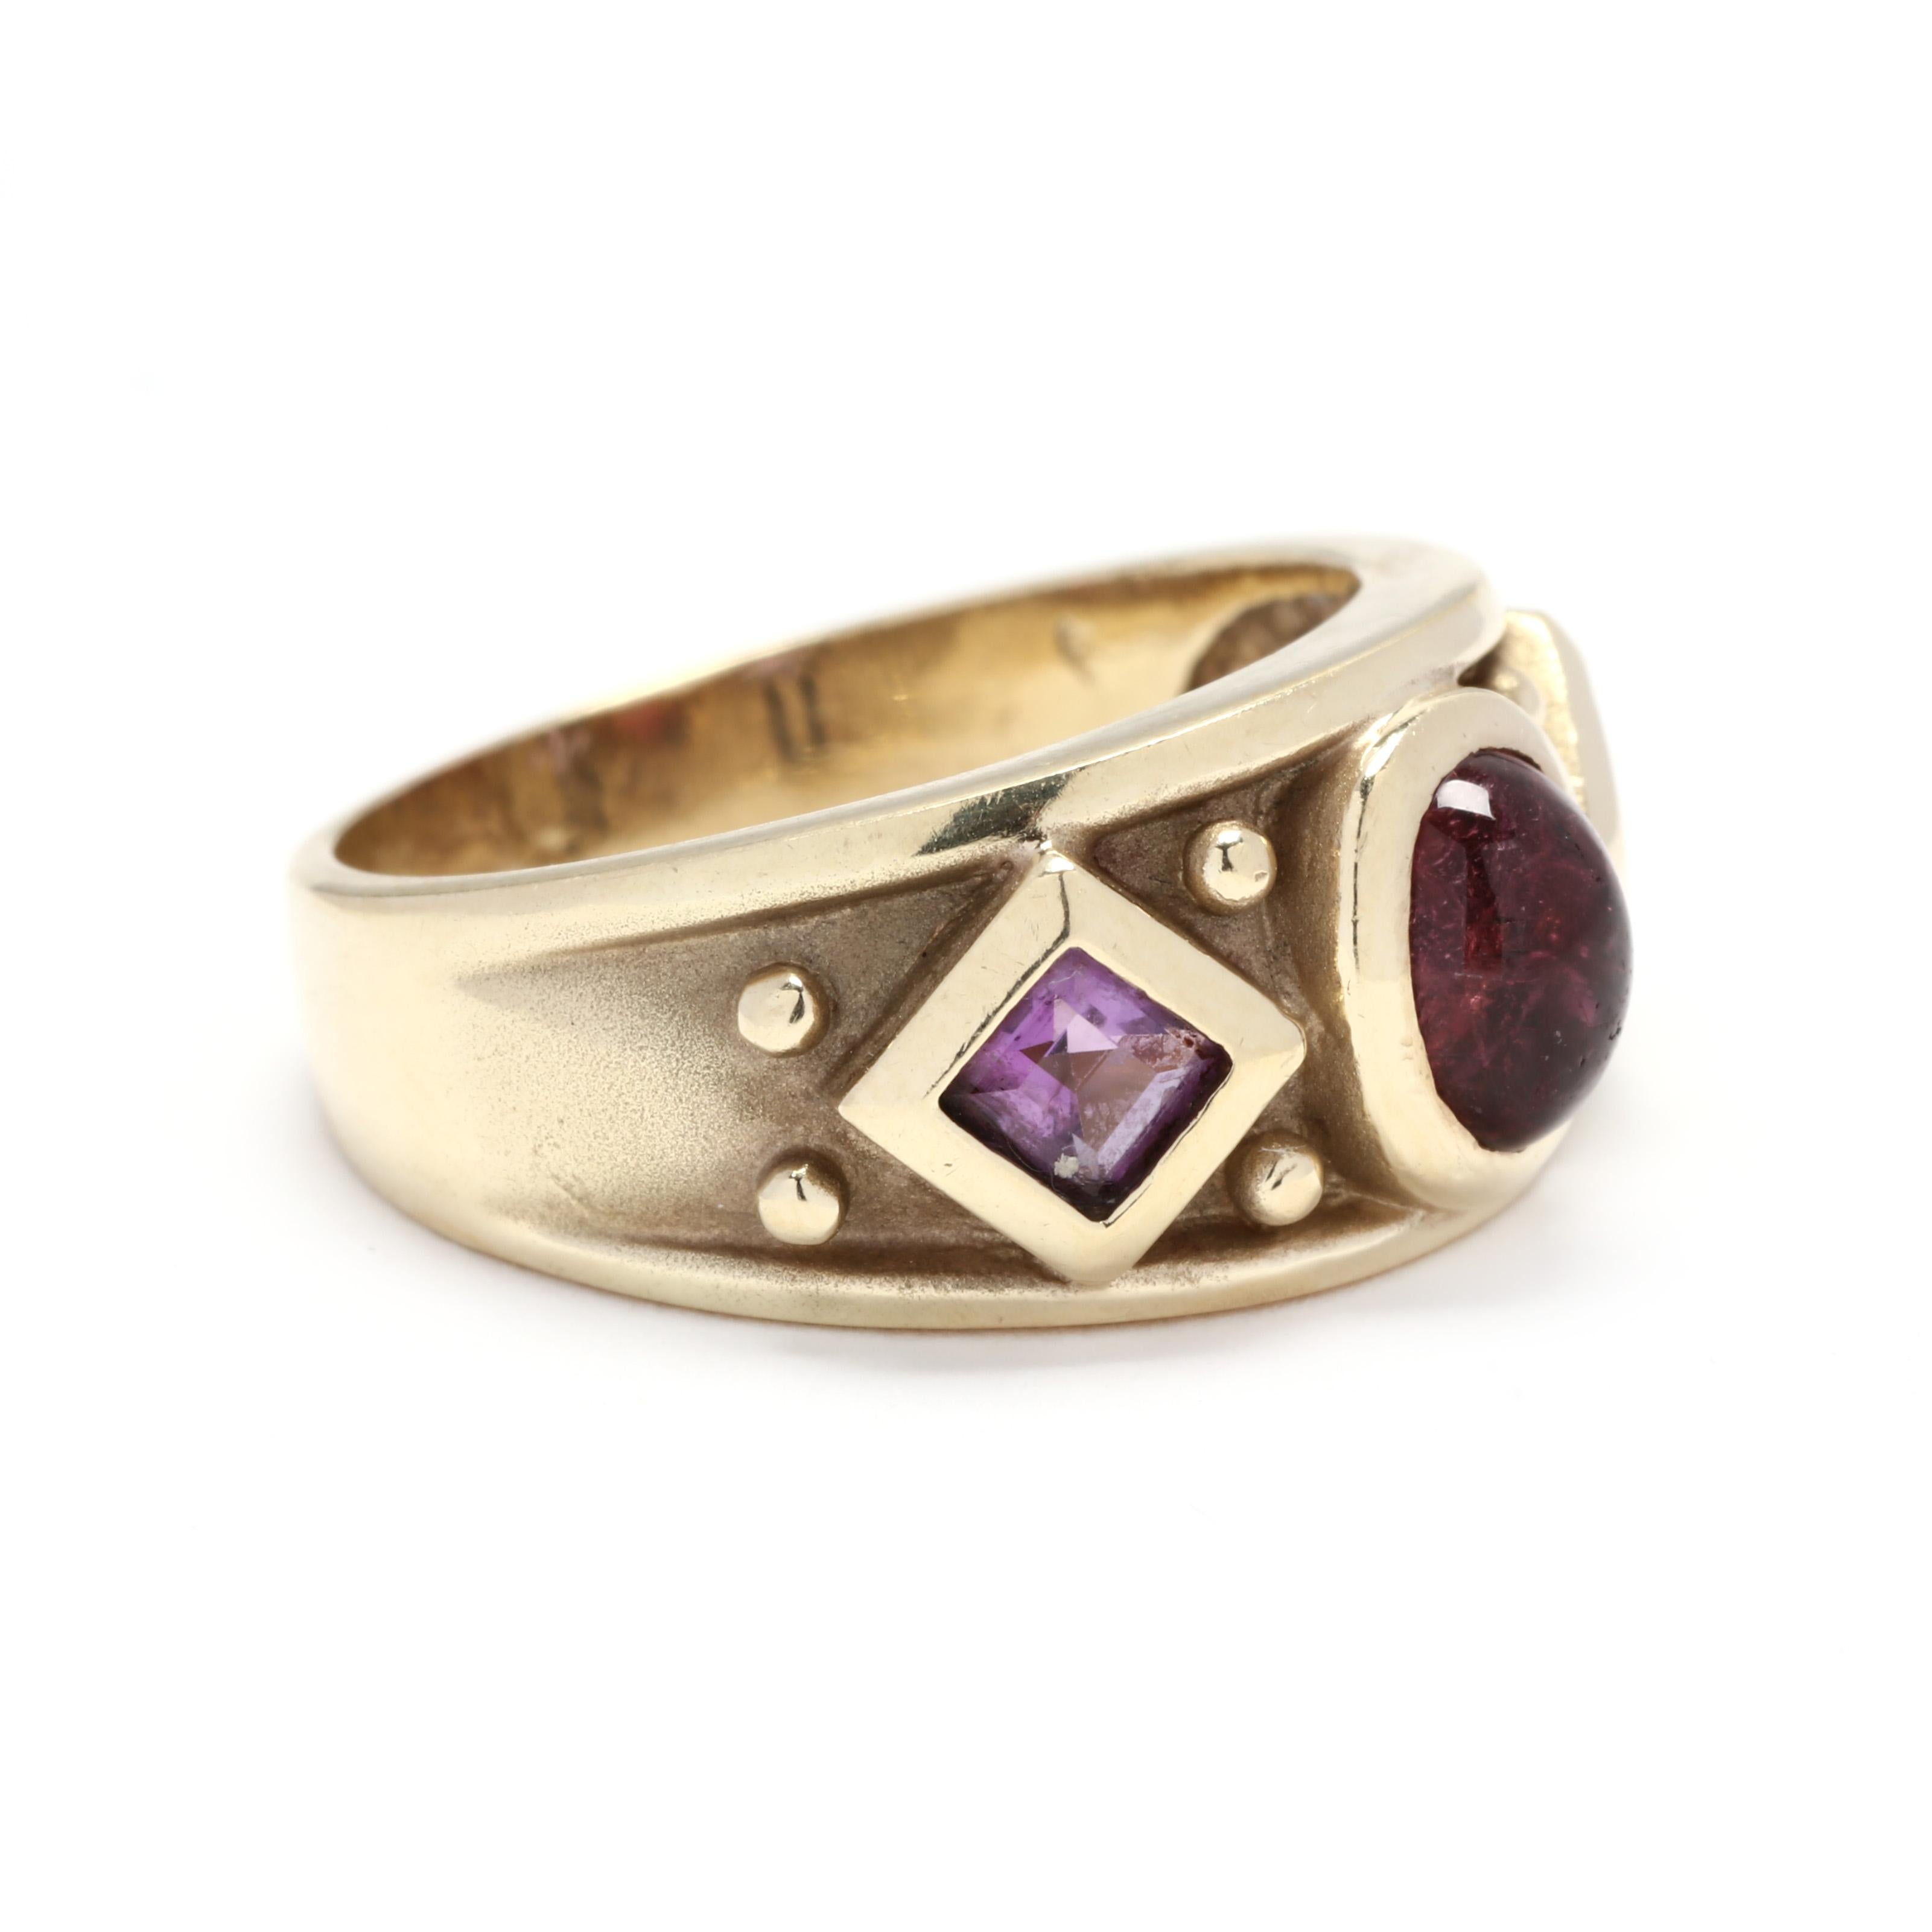 Vintage 14 karat yellow gold, pink tourmaline and amethyst wide band ring. A tapered band design centered on a bezel set, oval cabochon cut pink tourmaline weighing approximately 1.20 carats with a square cut amethyst on either side weighing